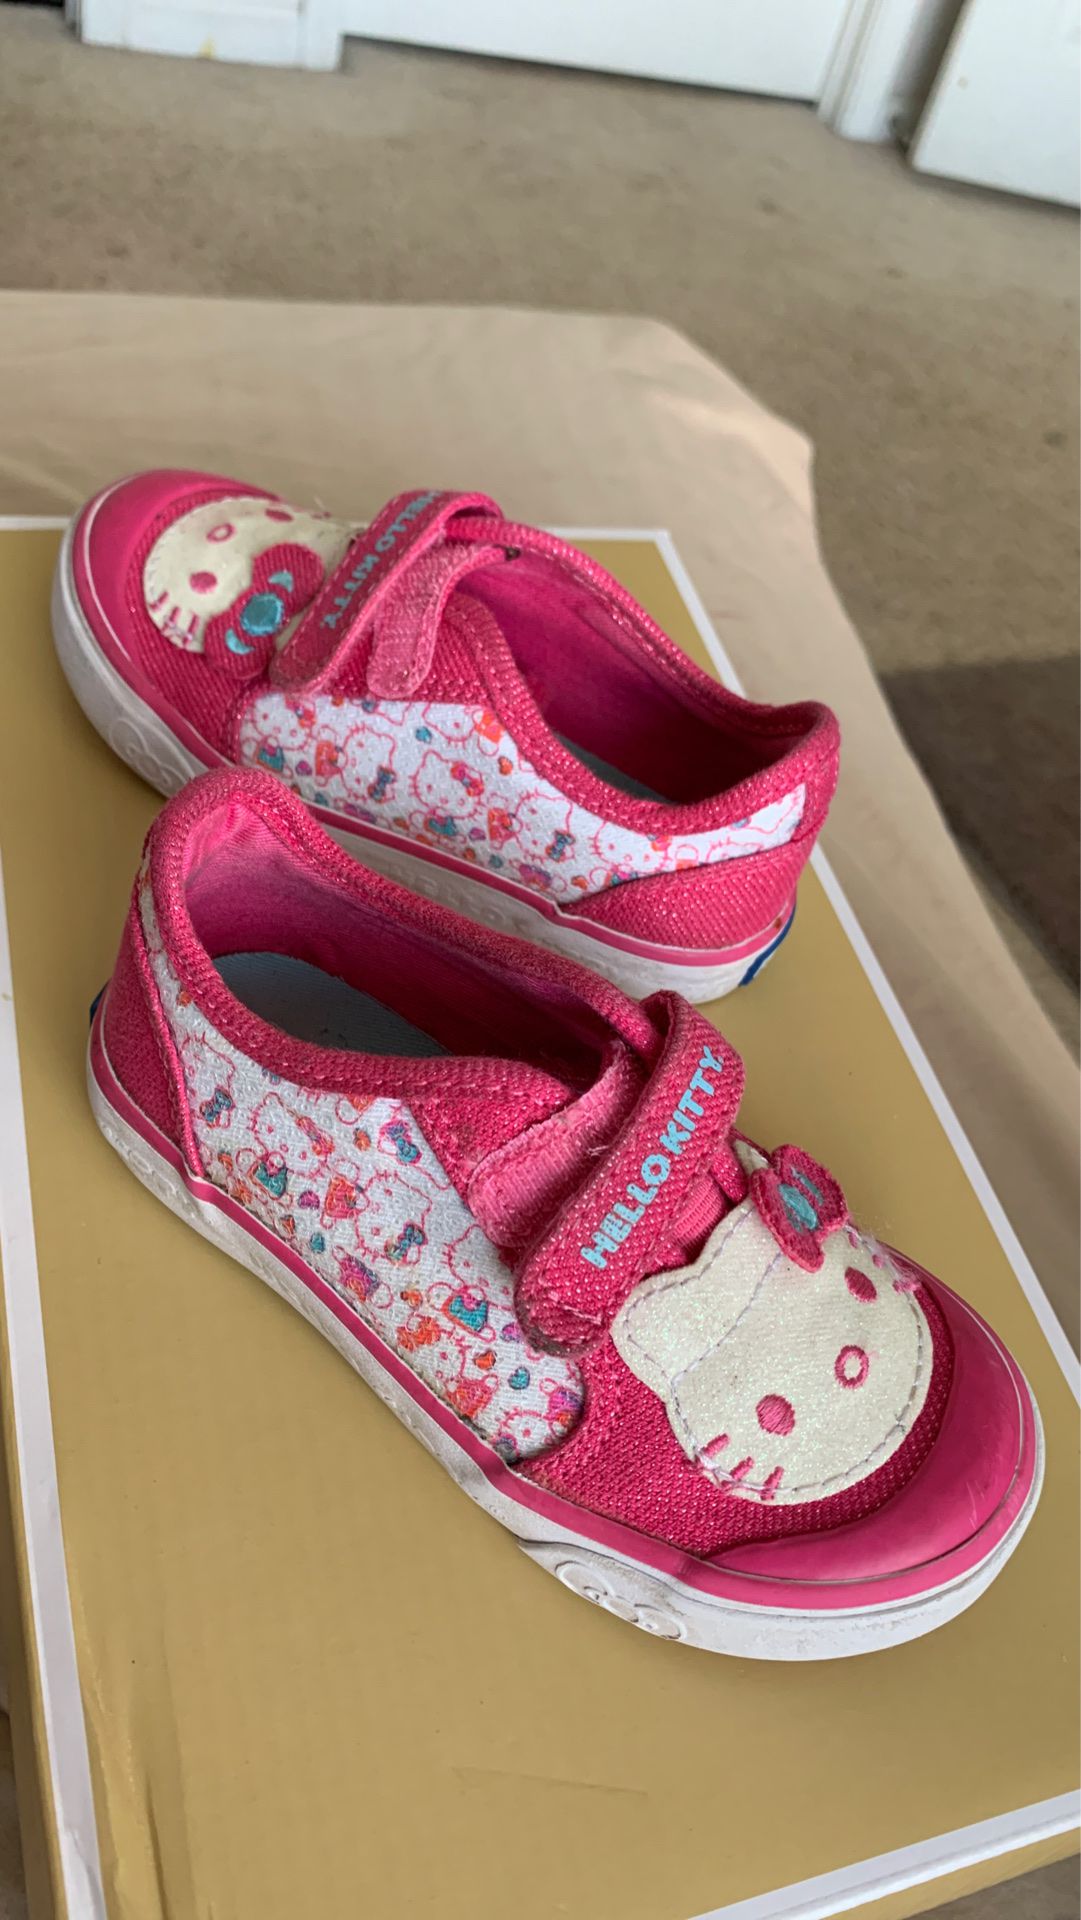 Keds toddler girl shoes Size 7